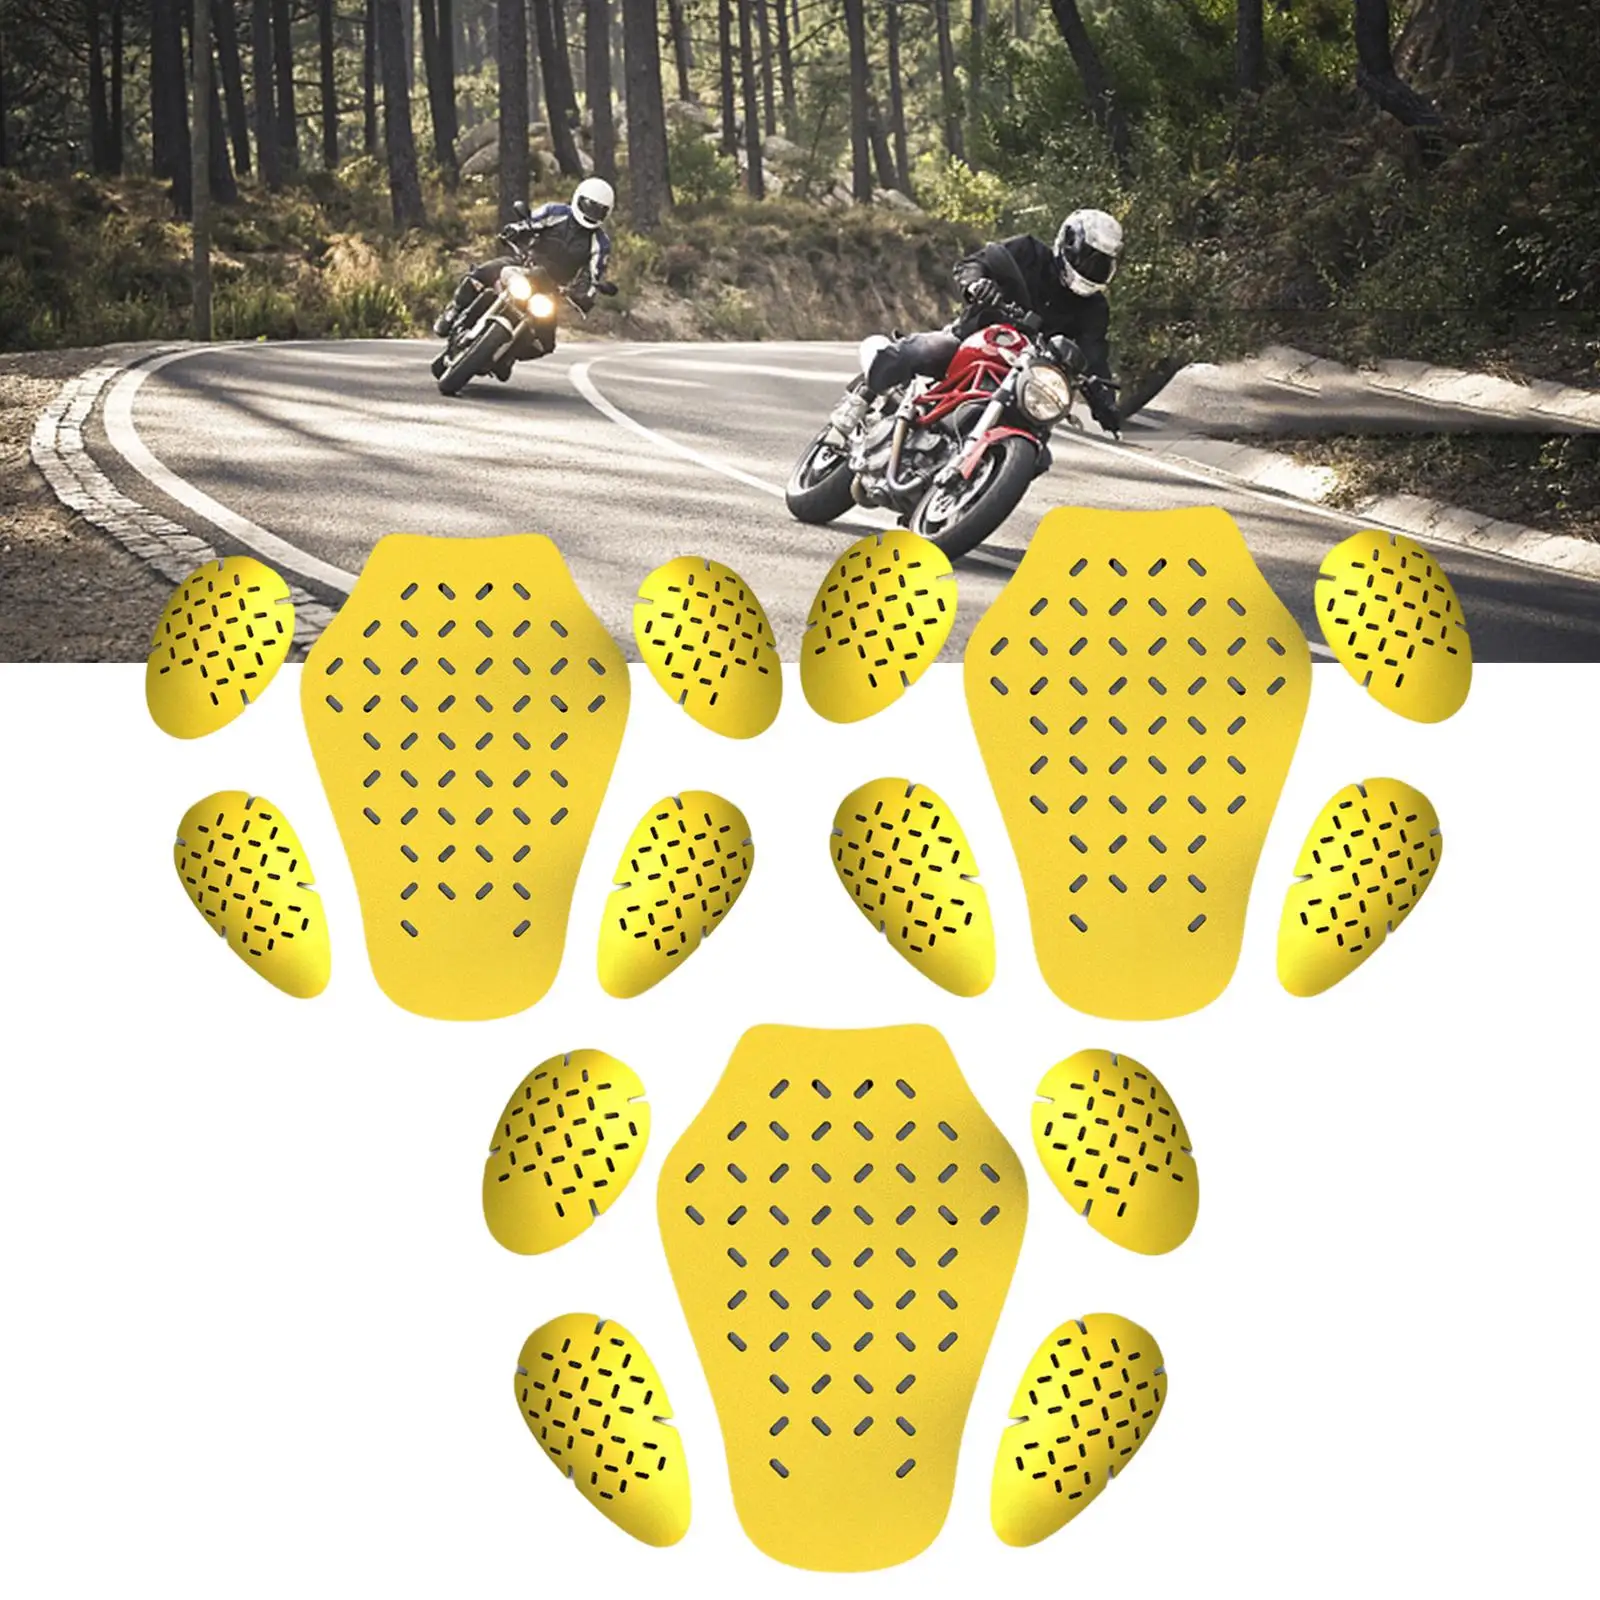 5Pcs Armor Pads EVA Armor Protection Pad for Protection Riding Cycling